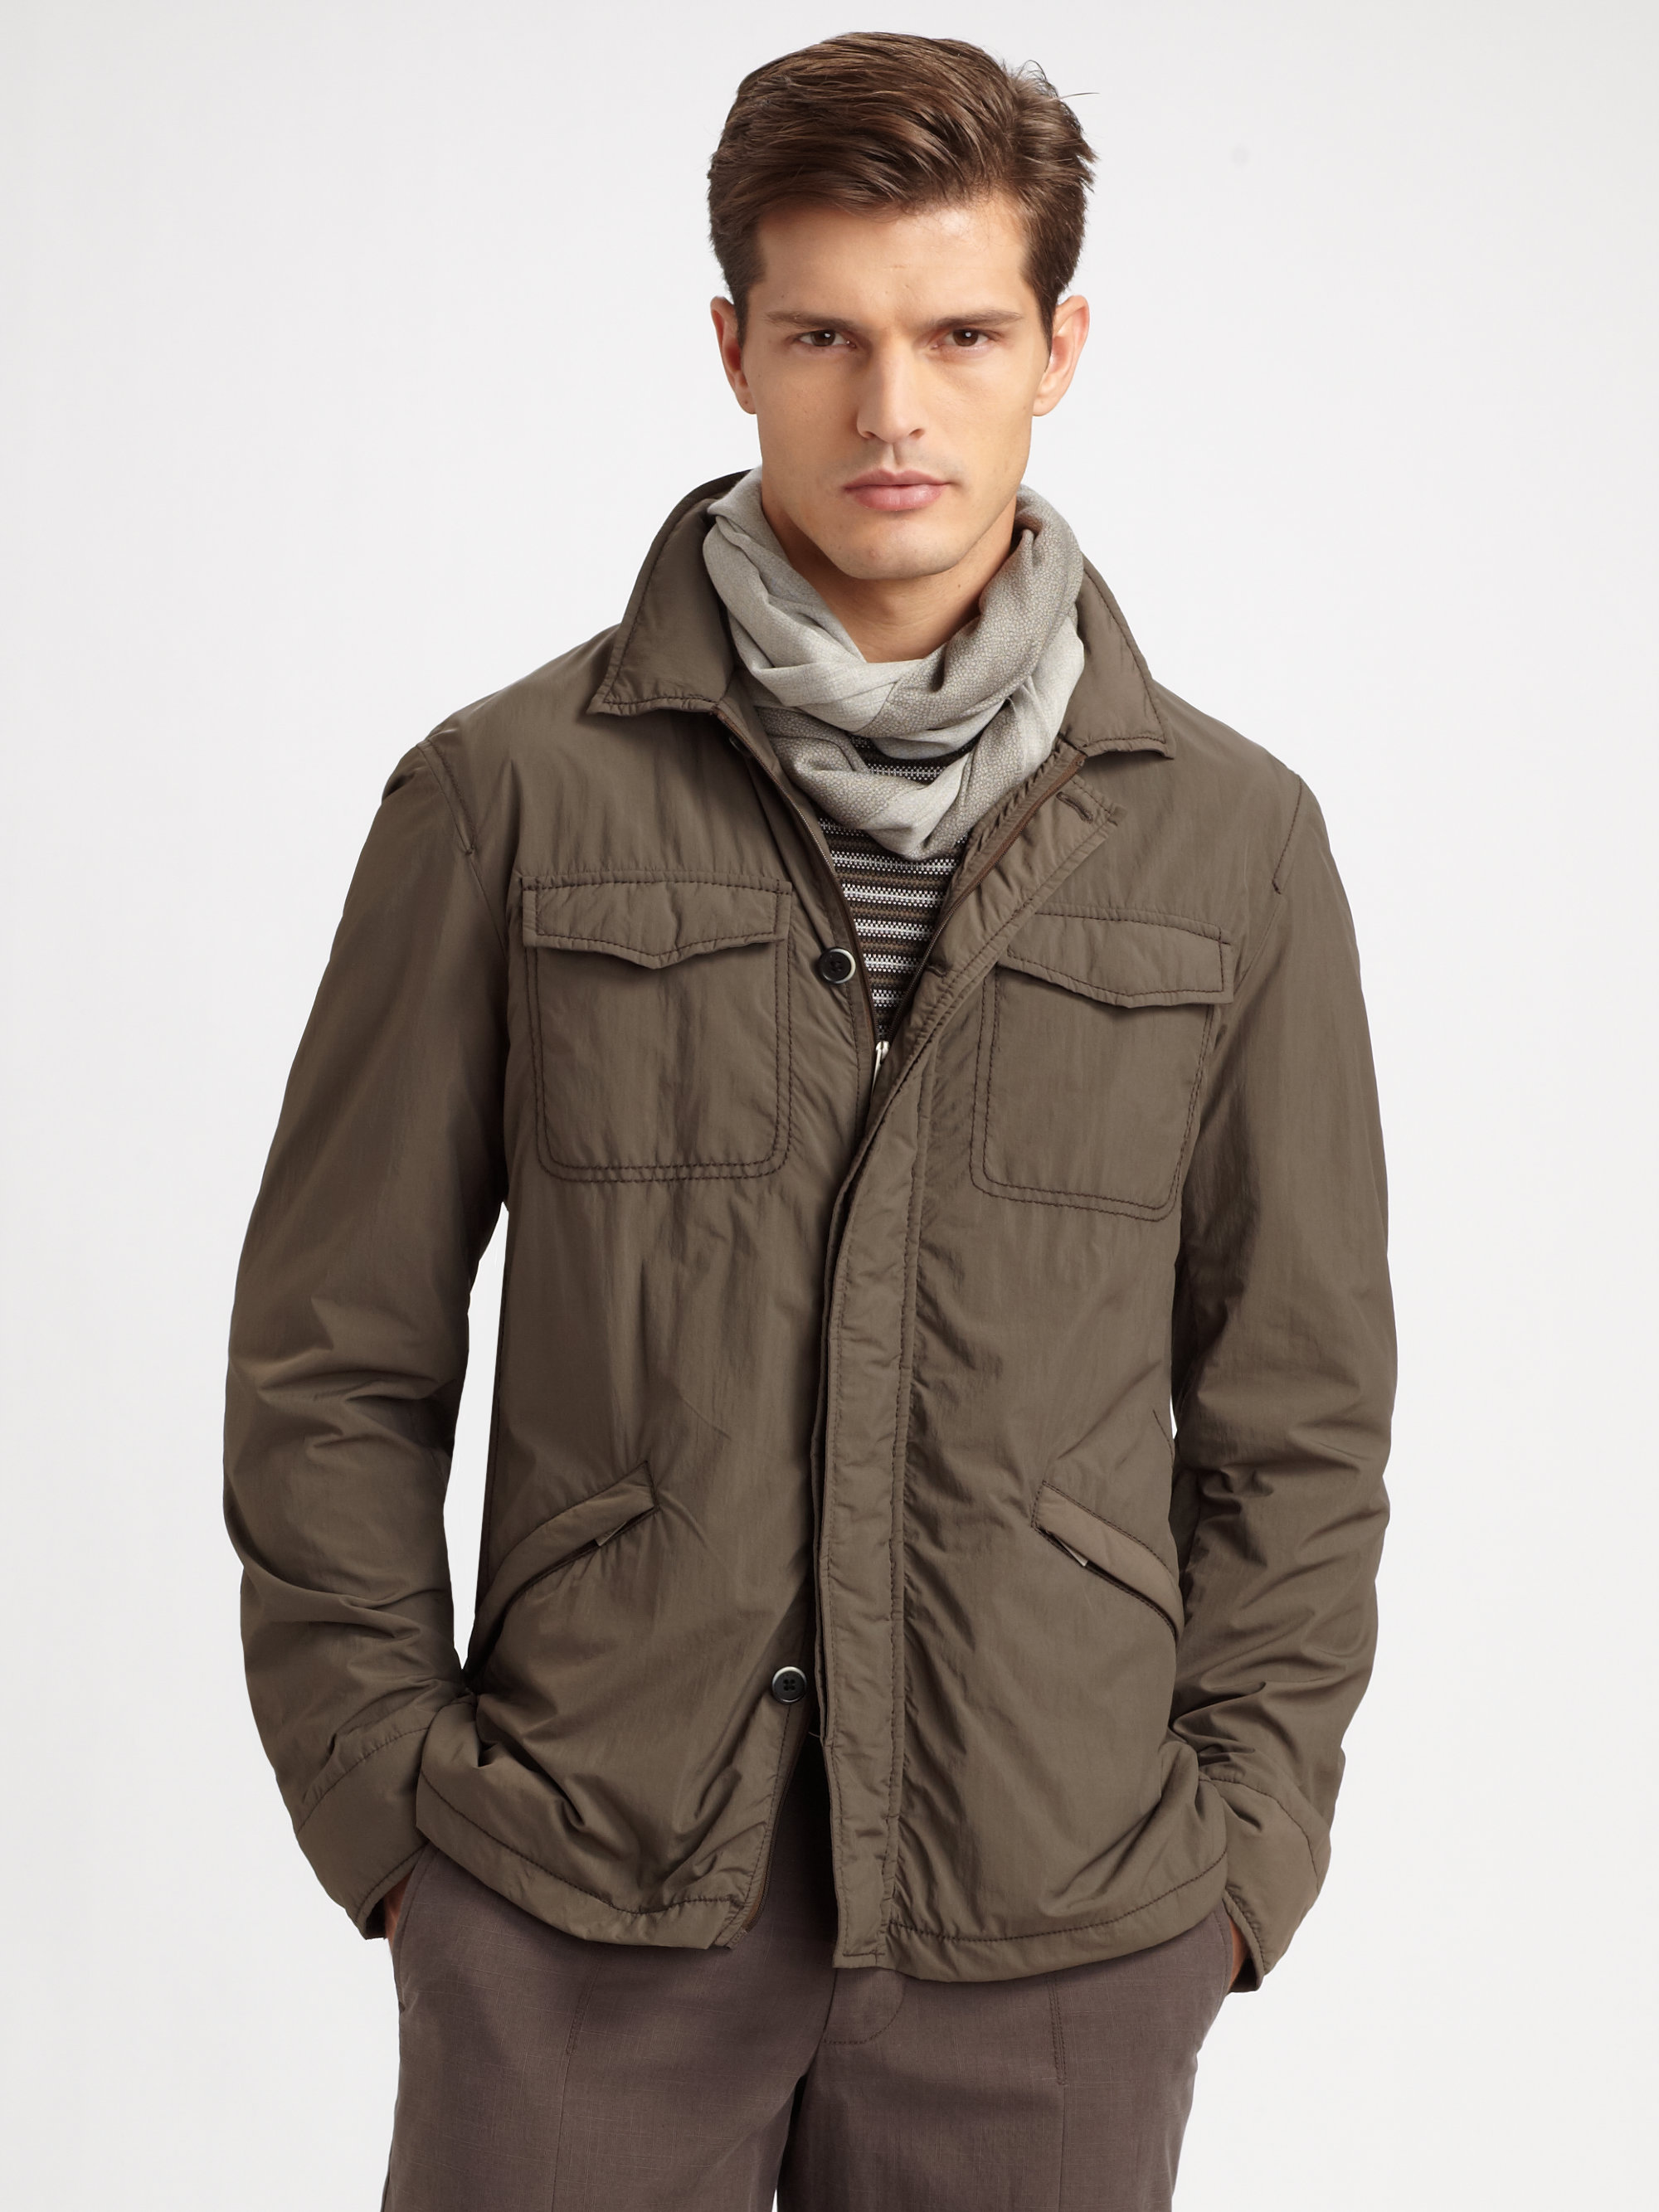 Lyst - Armani Packable Travel Jacket in Natural for Men